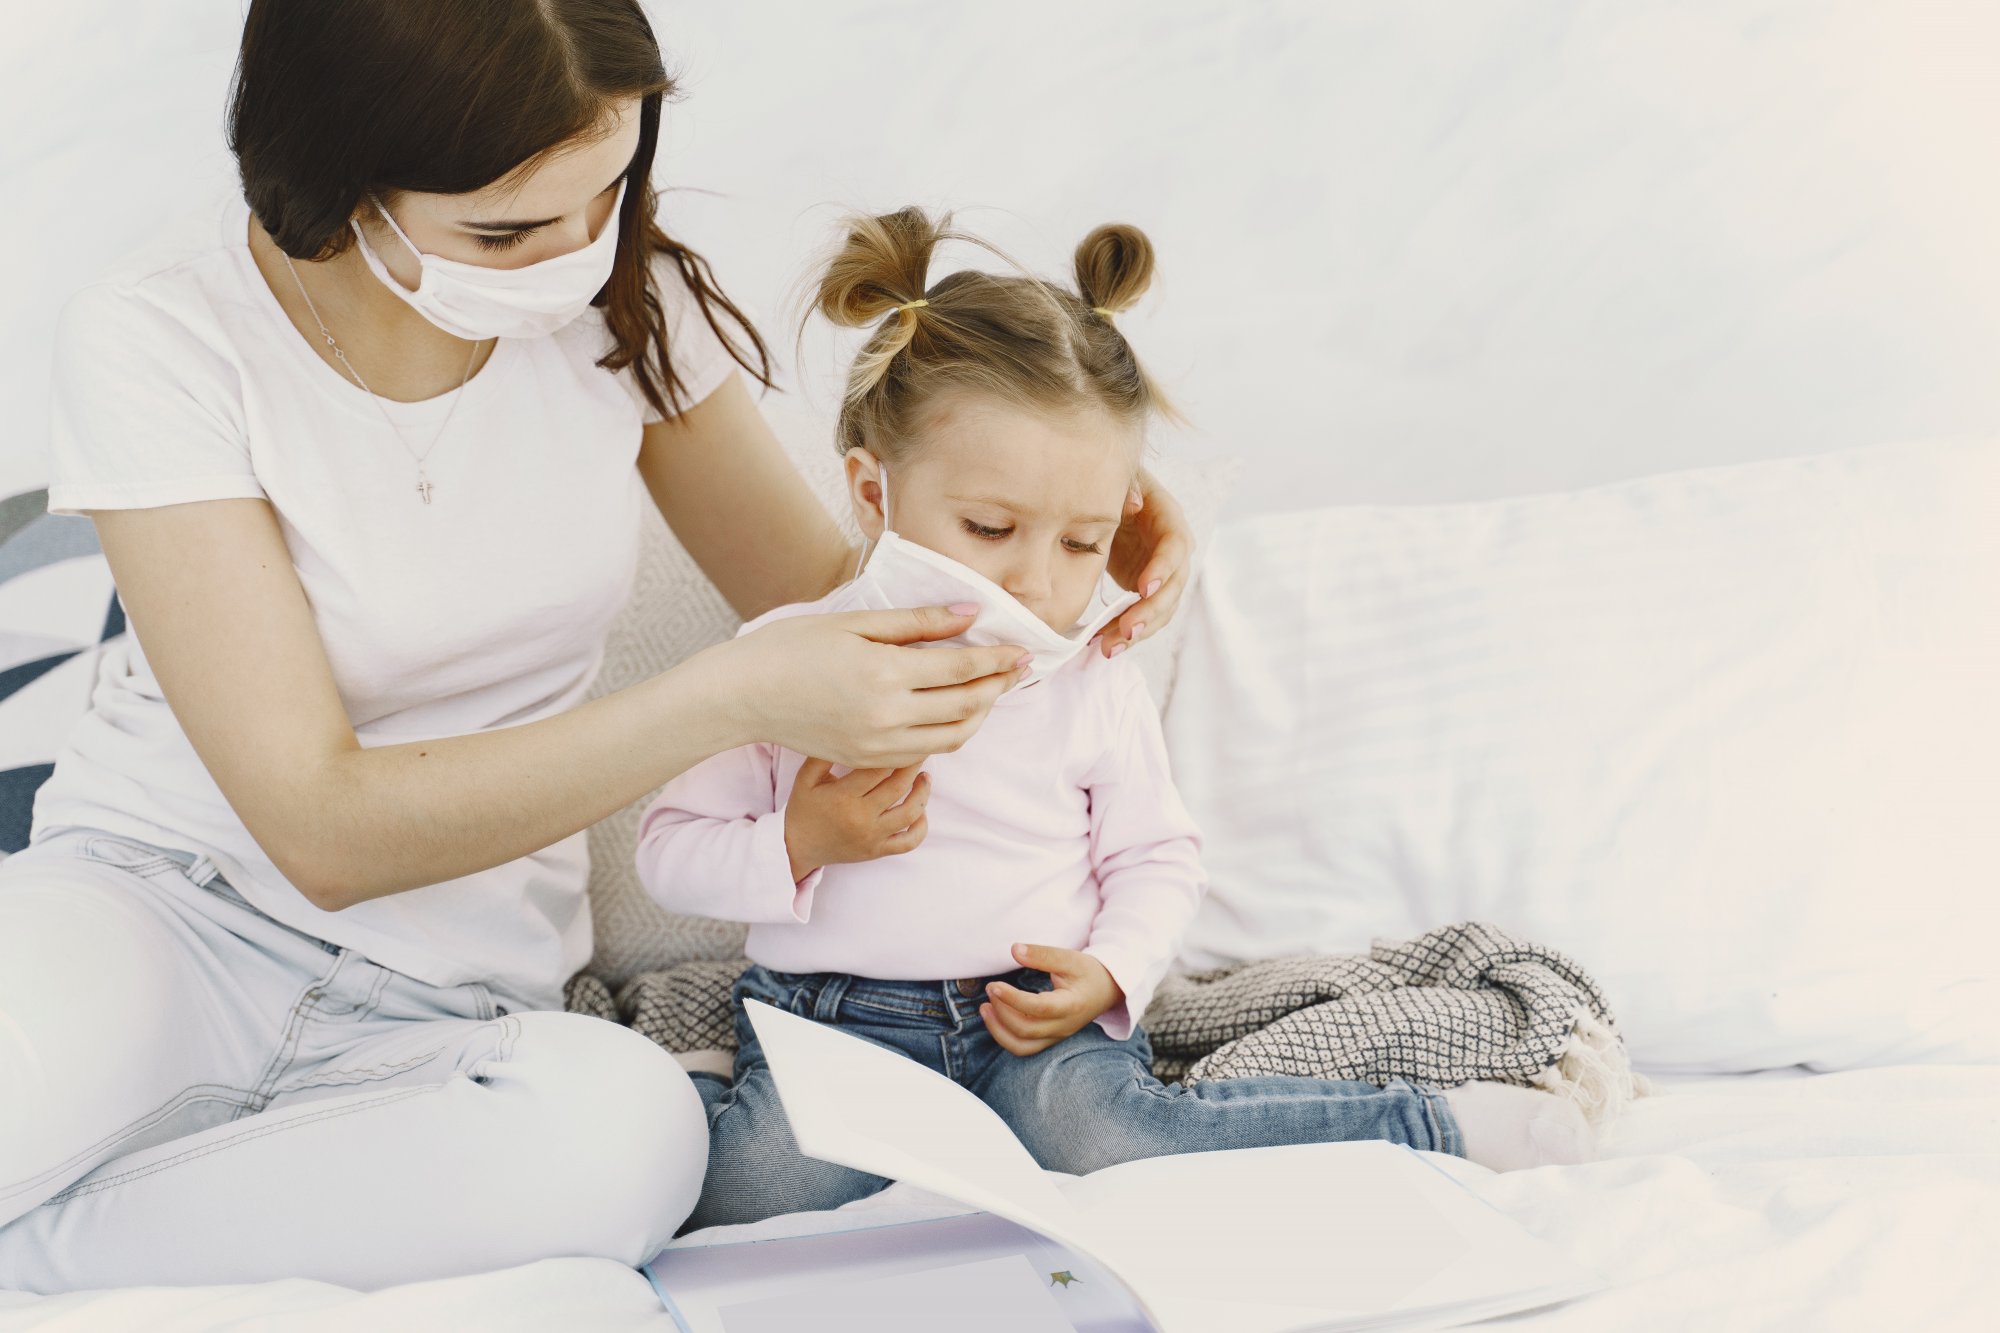 mother-baby-home-with-medical-masks